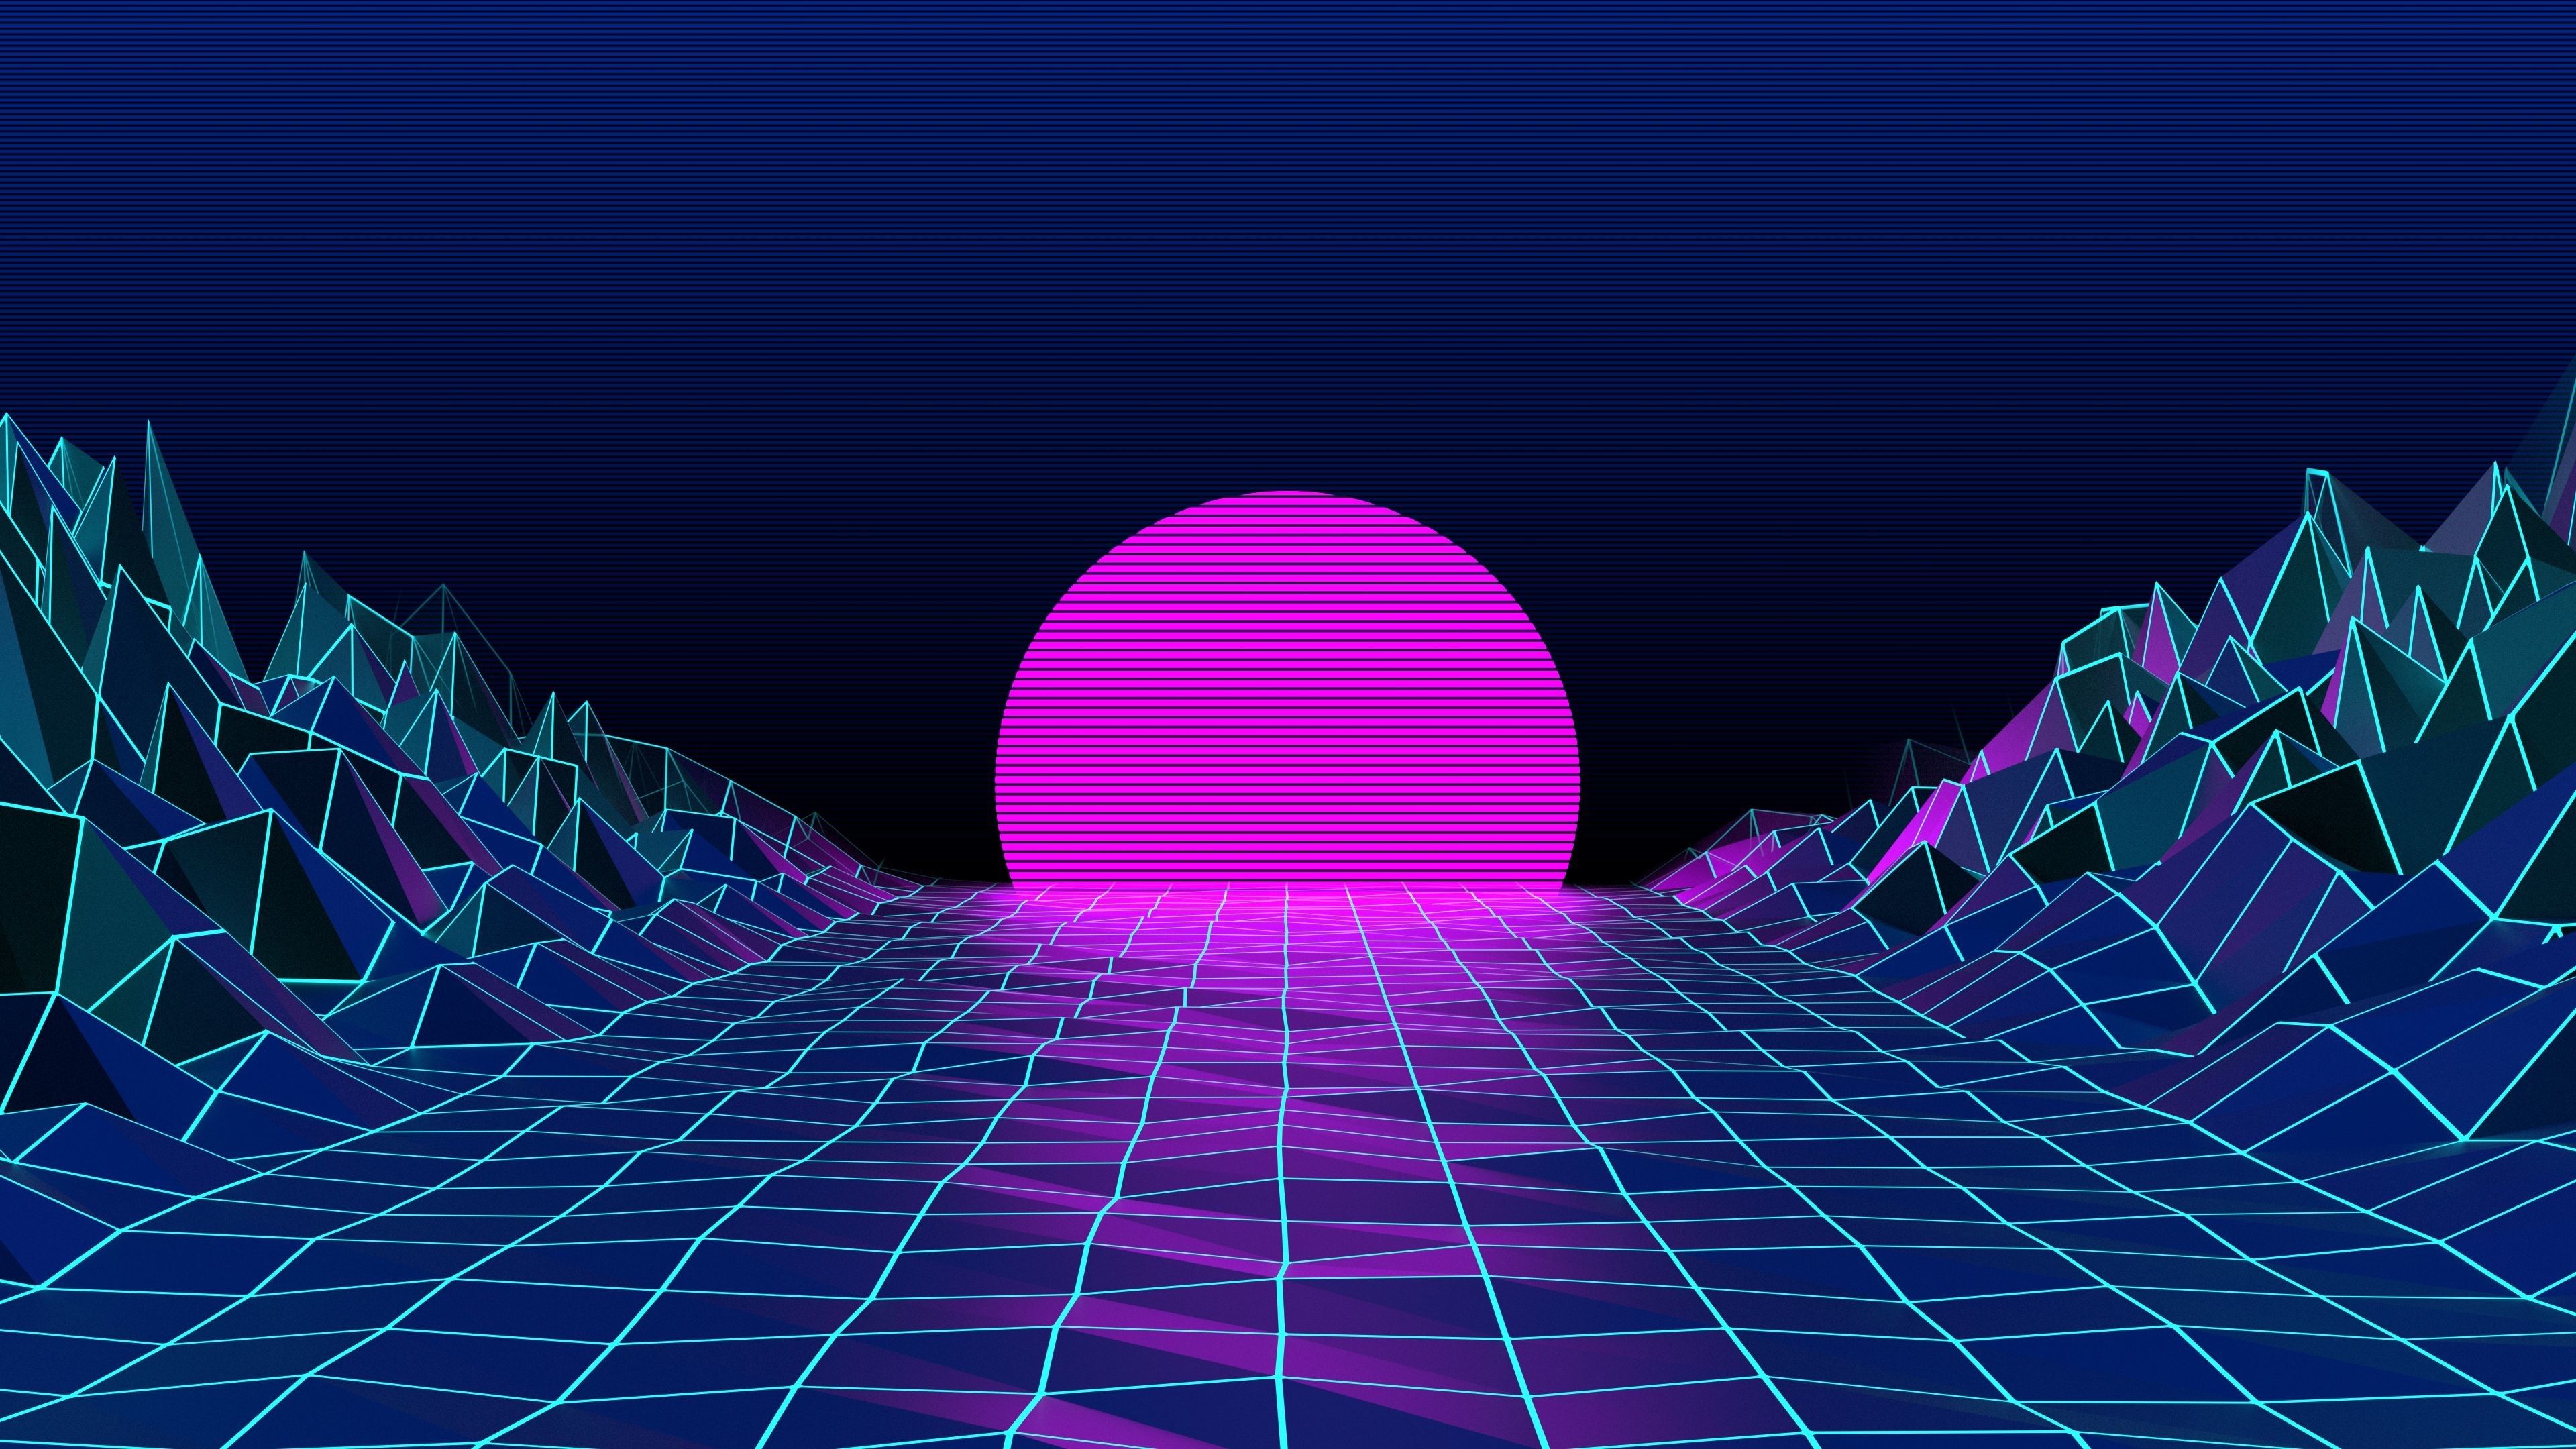 A neon colored tunnel with mountains and an egg - Laptop, HD, Windows 10